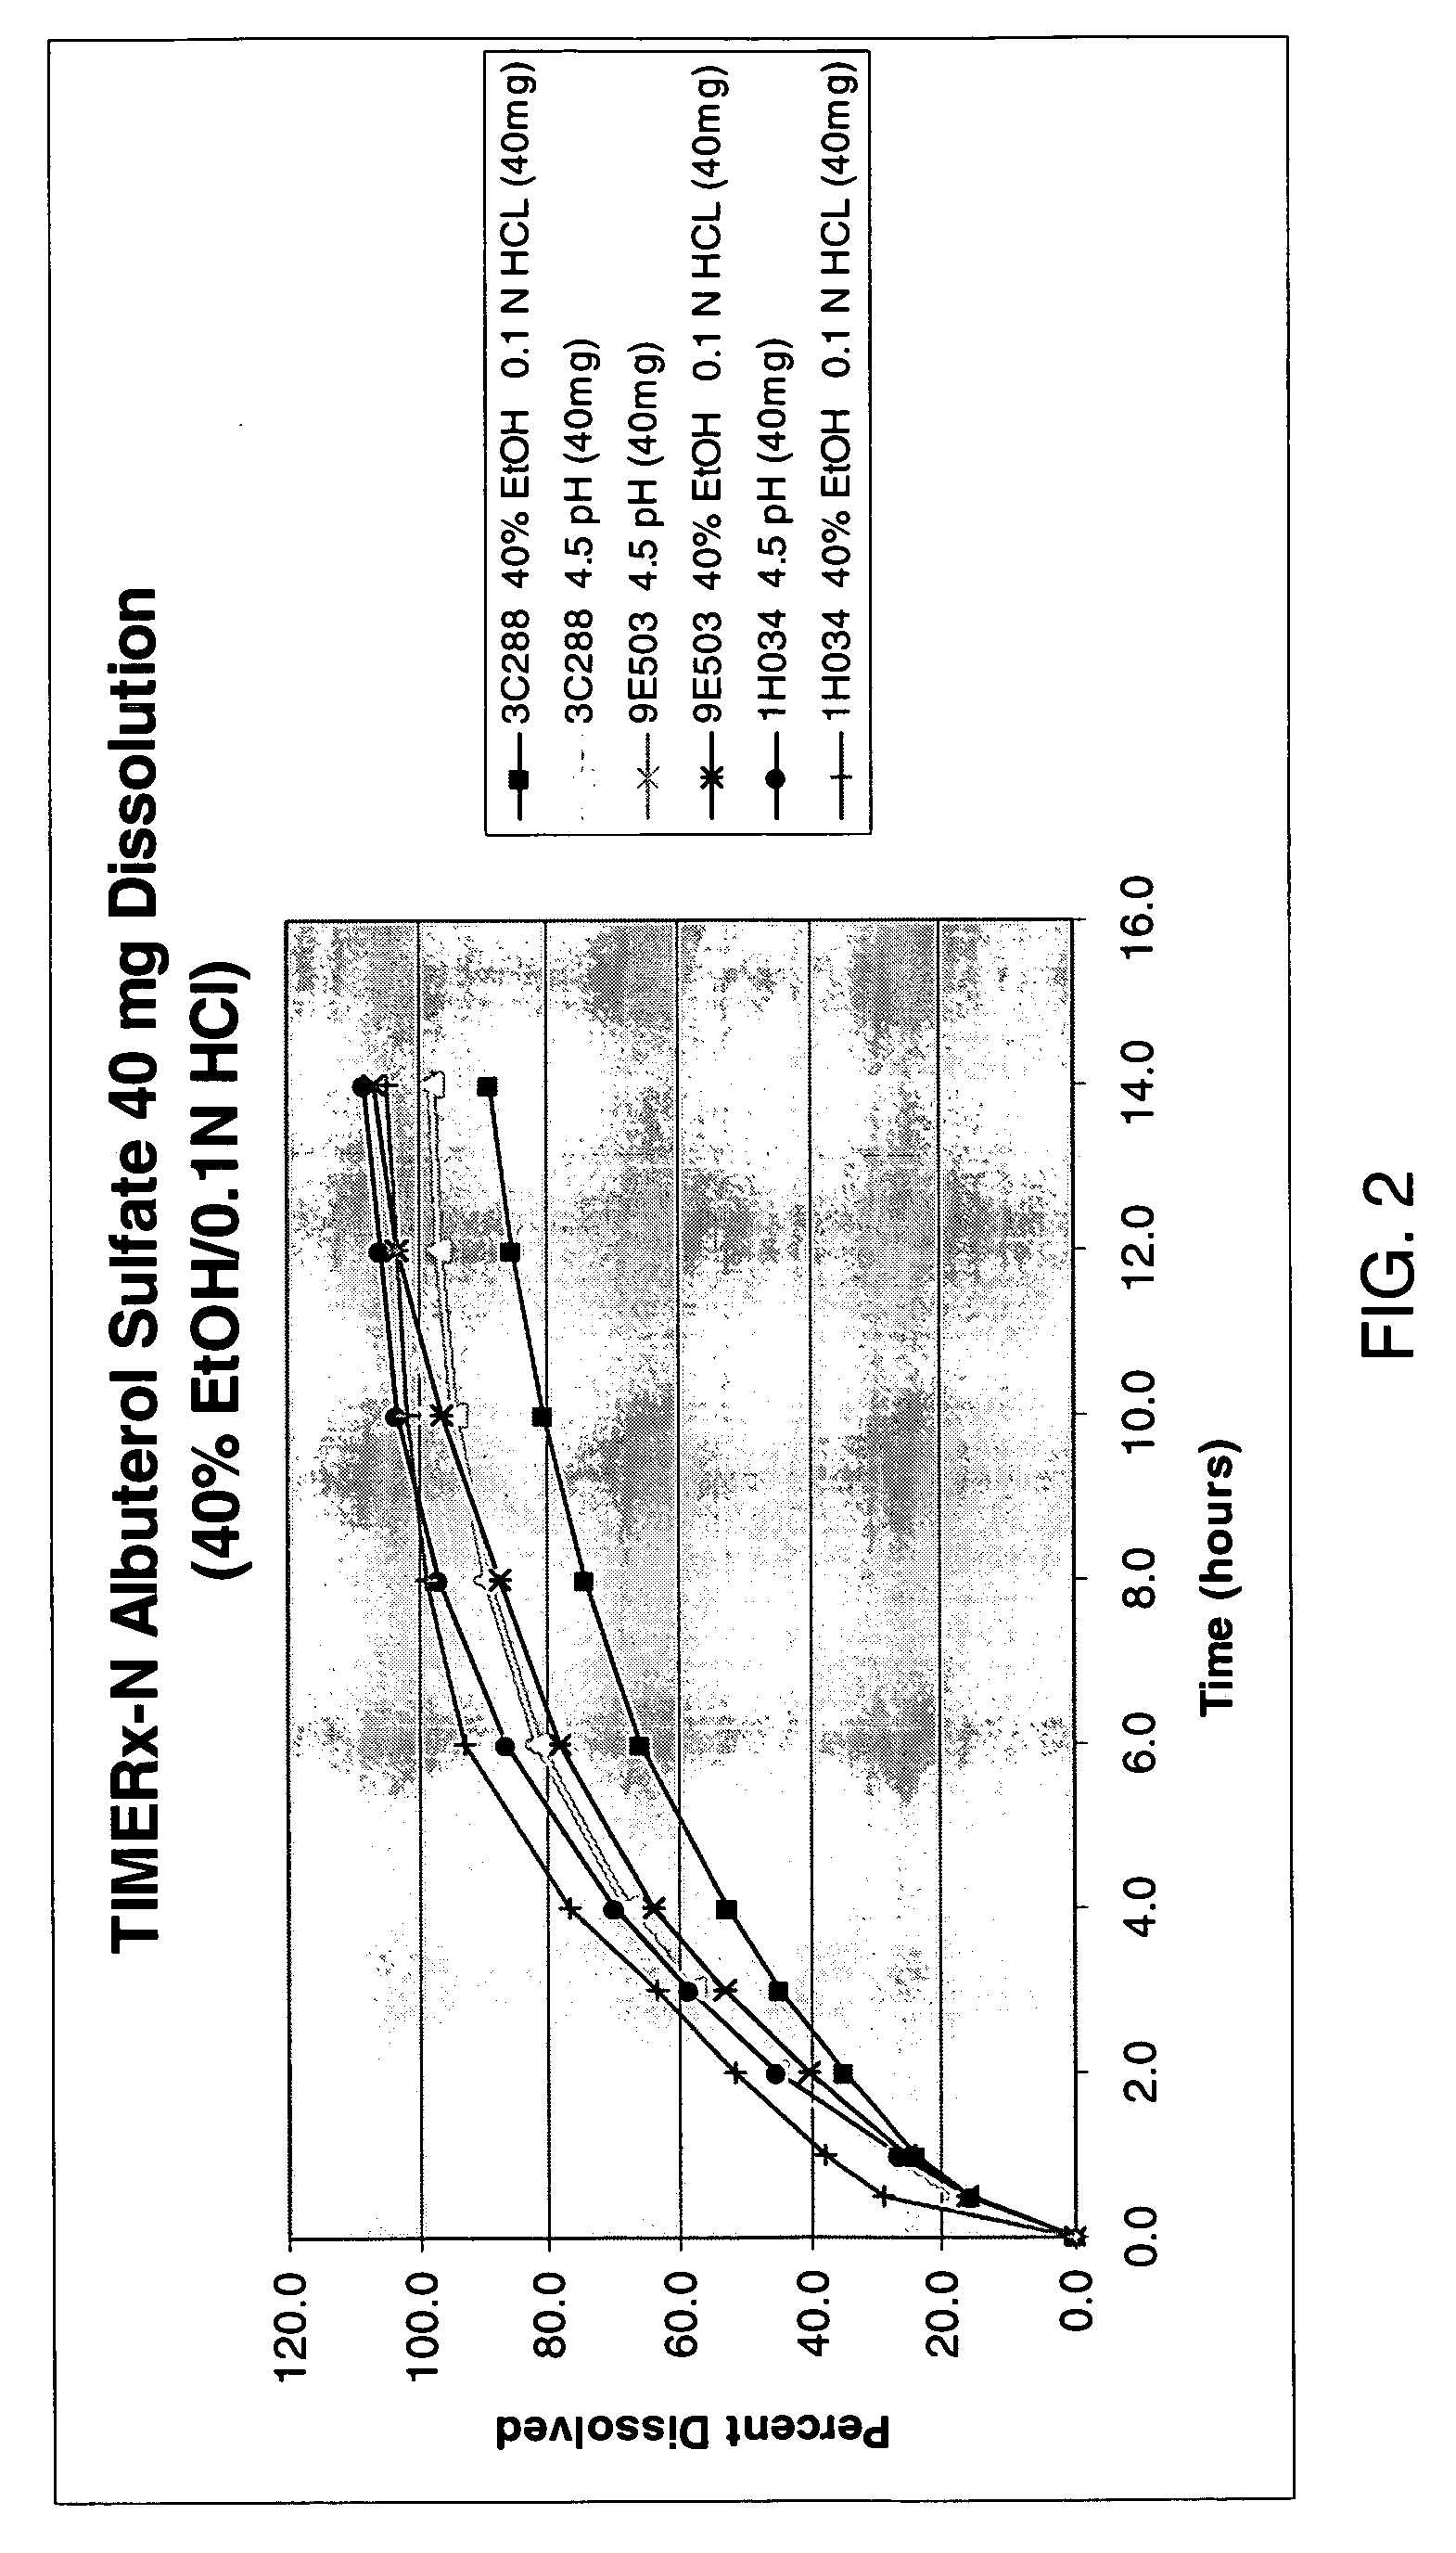 Ethanol-resistant sustained release formulations